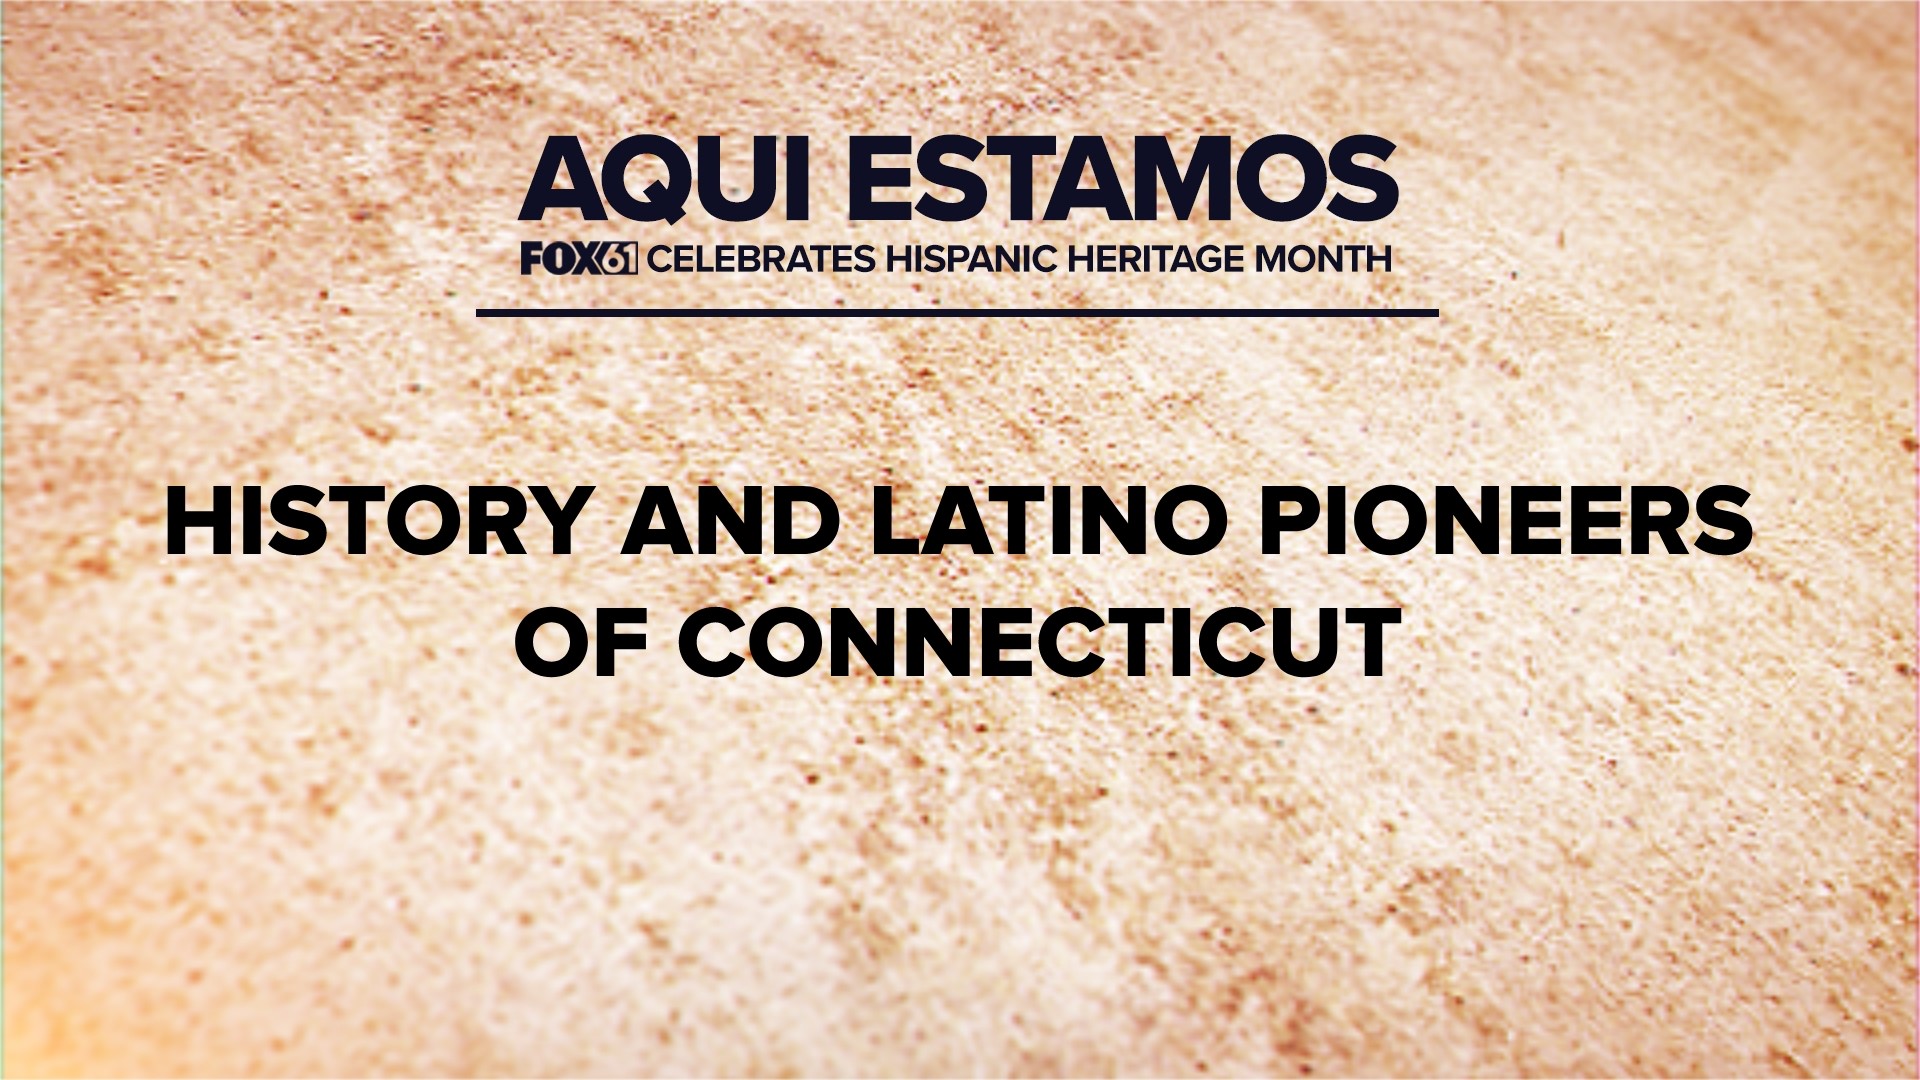 The Latino community in Connecticut is part of the fabric and history of the state.